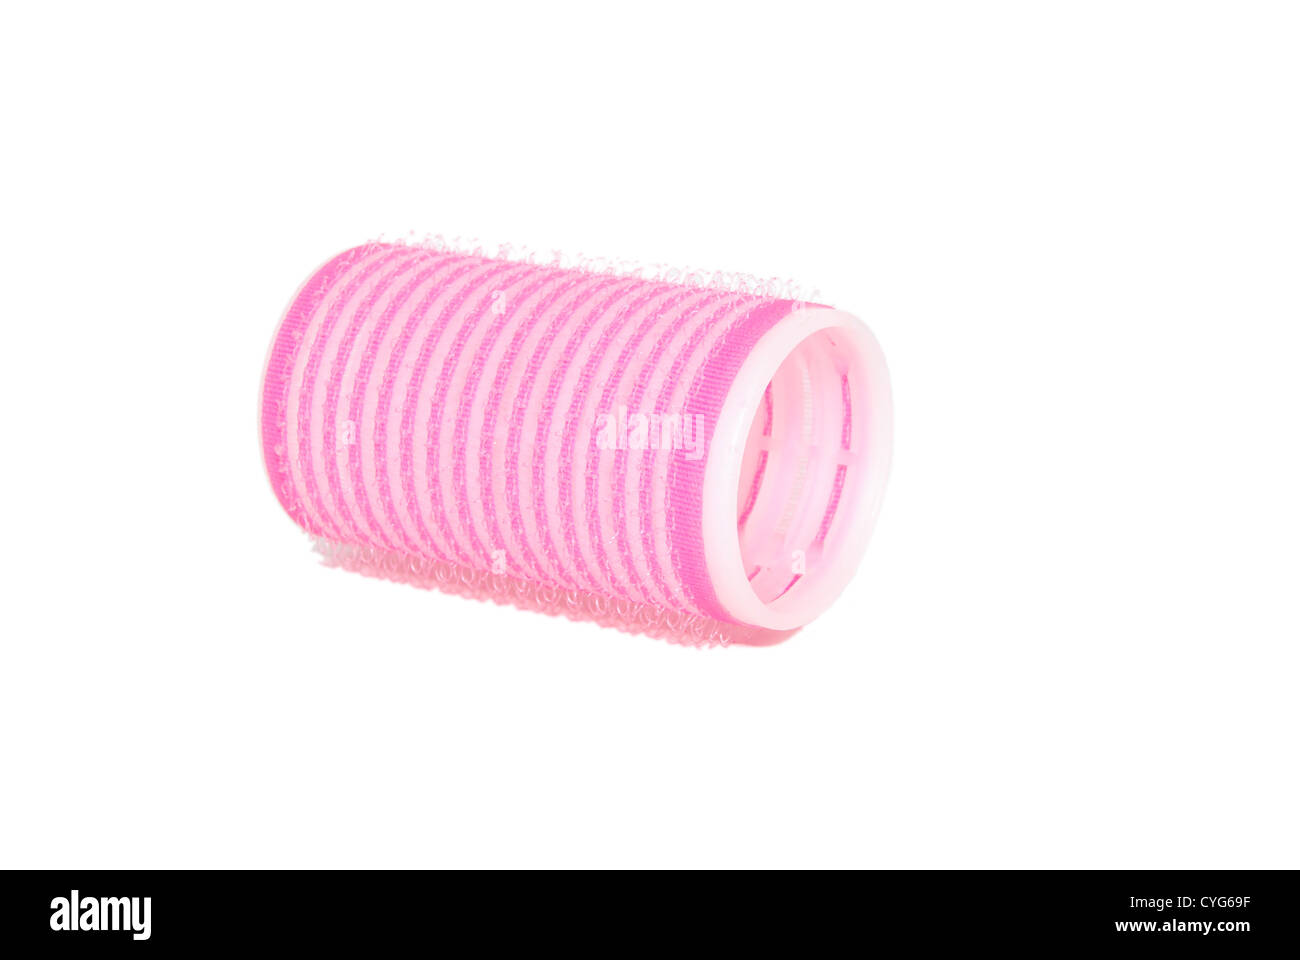 One velcro roller lying on its side, isolated on a white background Stock Photo